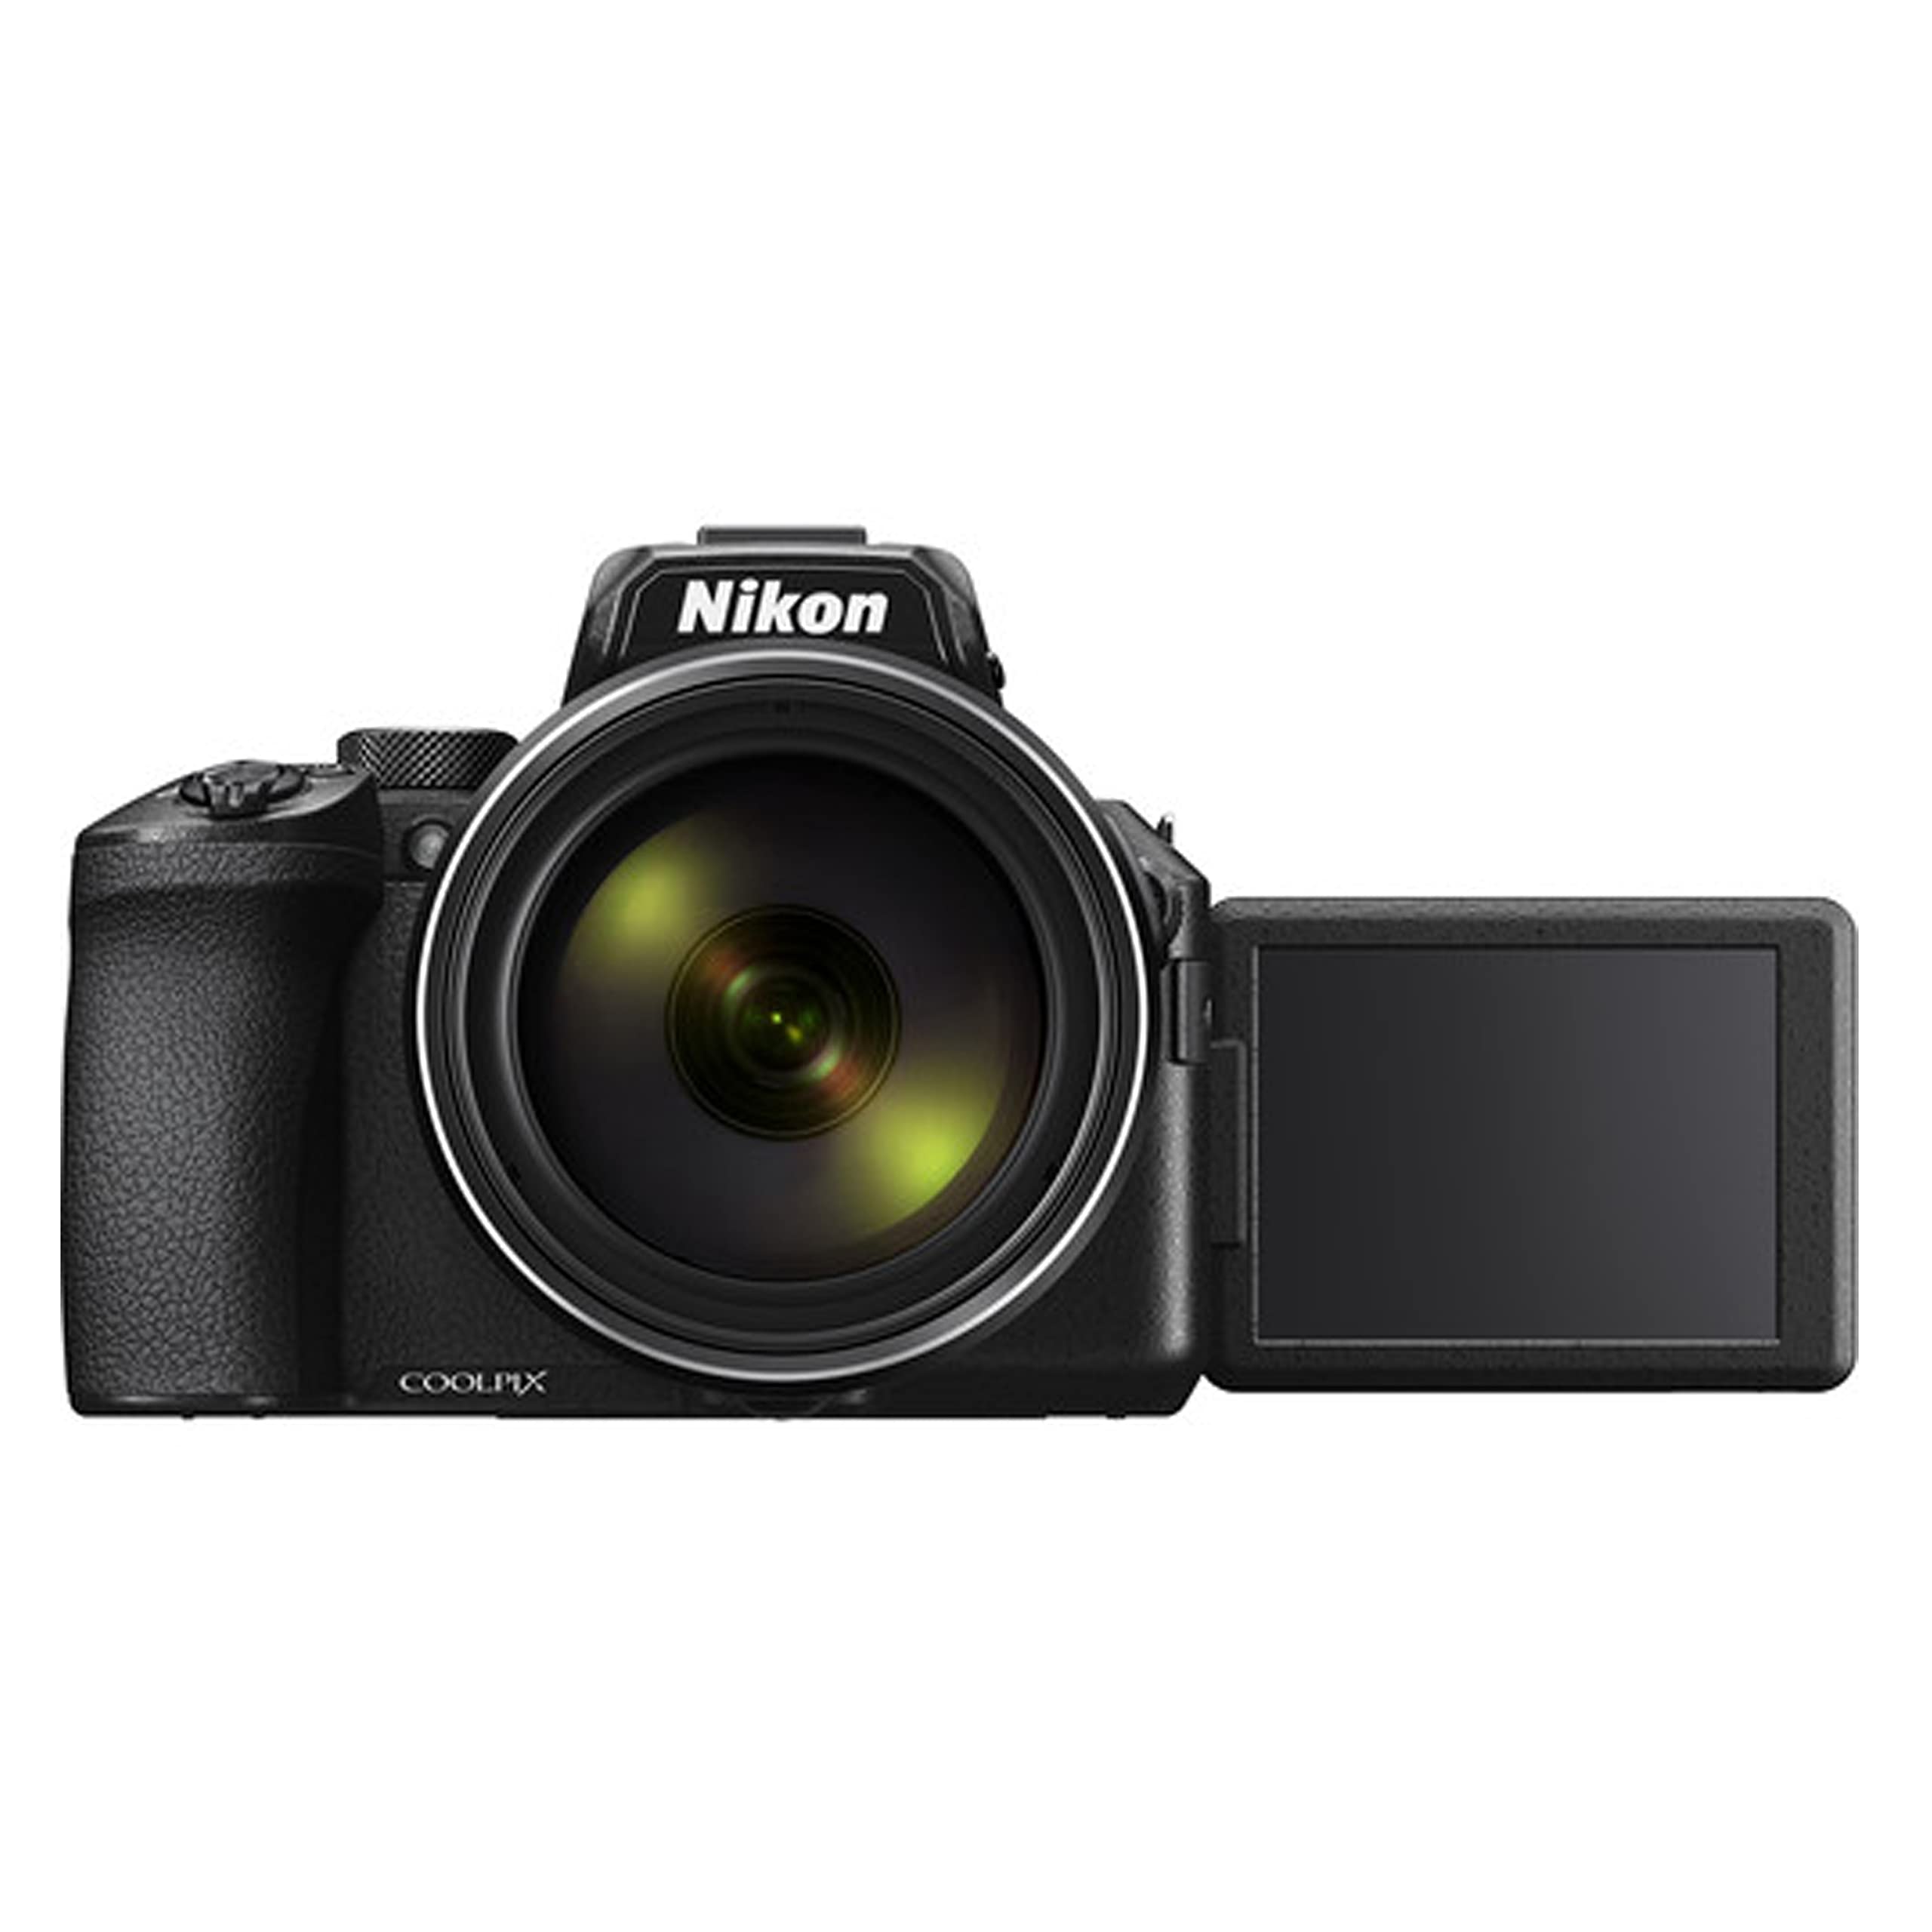 Nikon COOLPIX P950 16MP 83x Optical Digital Point and Shoot Camera + 128GB Memory + Case + Filters + 3 Piece Filter Kit + More (24pc Bundle)